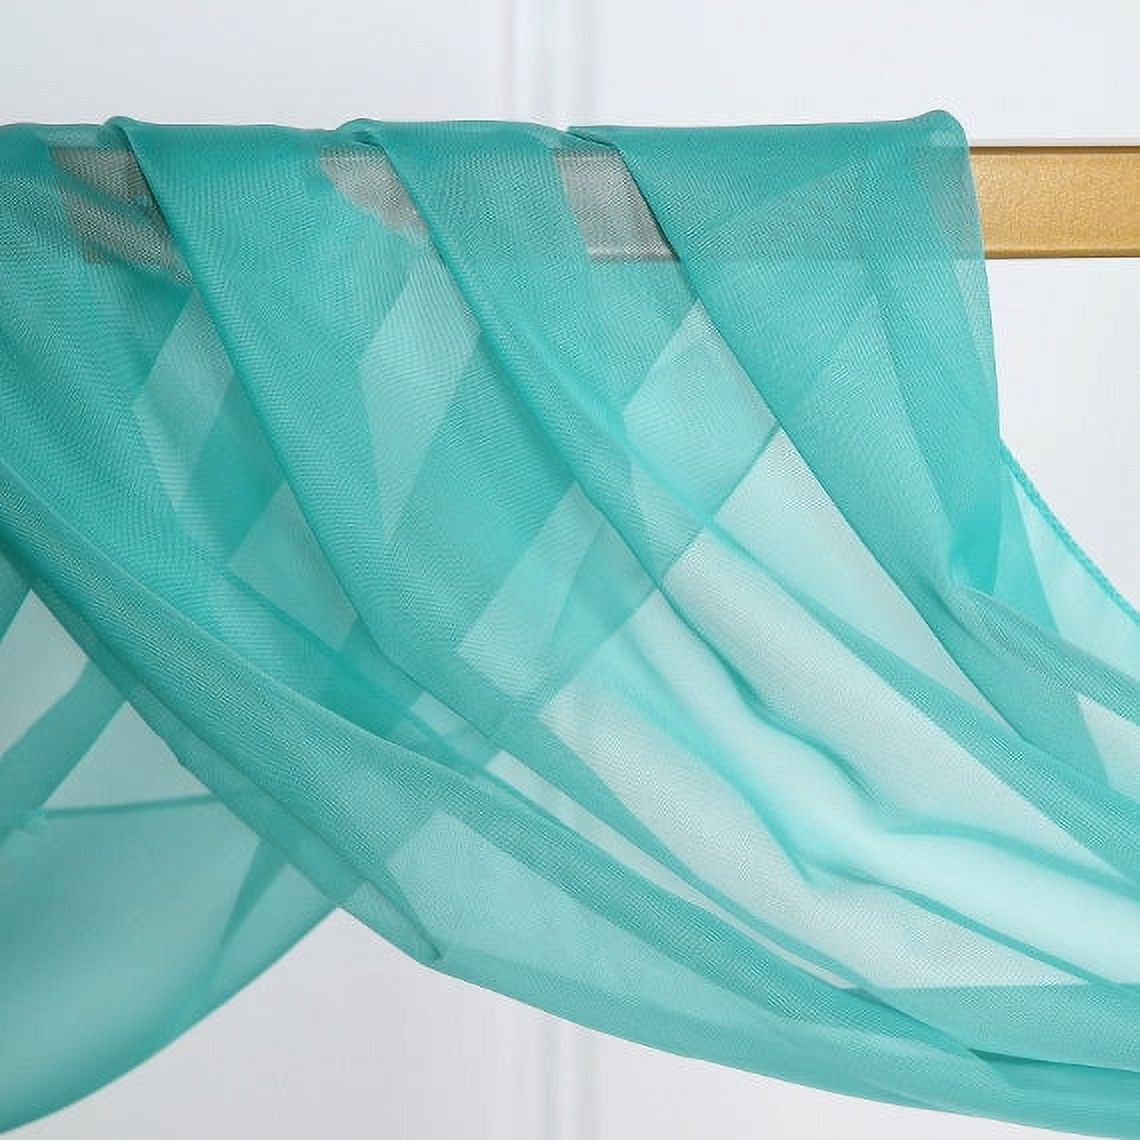 58/60 Turquoise Foil Star Organza Fabric By The Yard [TURQ-FOILORGANDY] -  $3.49 : , Burlap for Wedding and Special Events